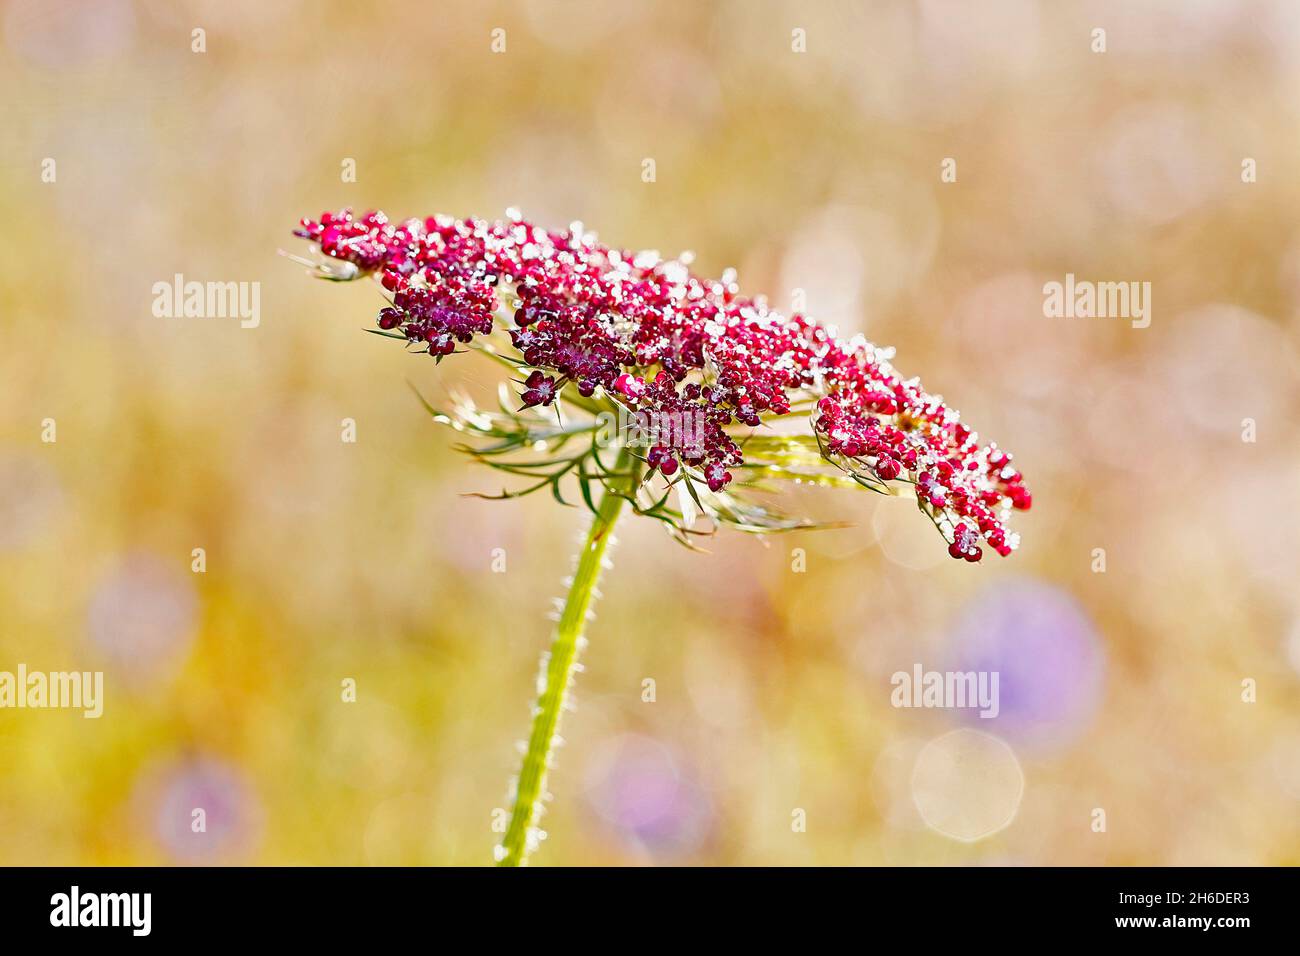 Queen Anne's lace, wild carrot (Daucus carota), inflorescence with red flowers, Germany, North Rhine-Westphalia Stock Photo